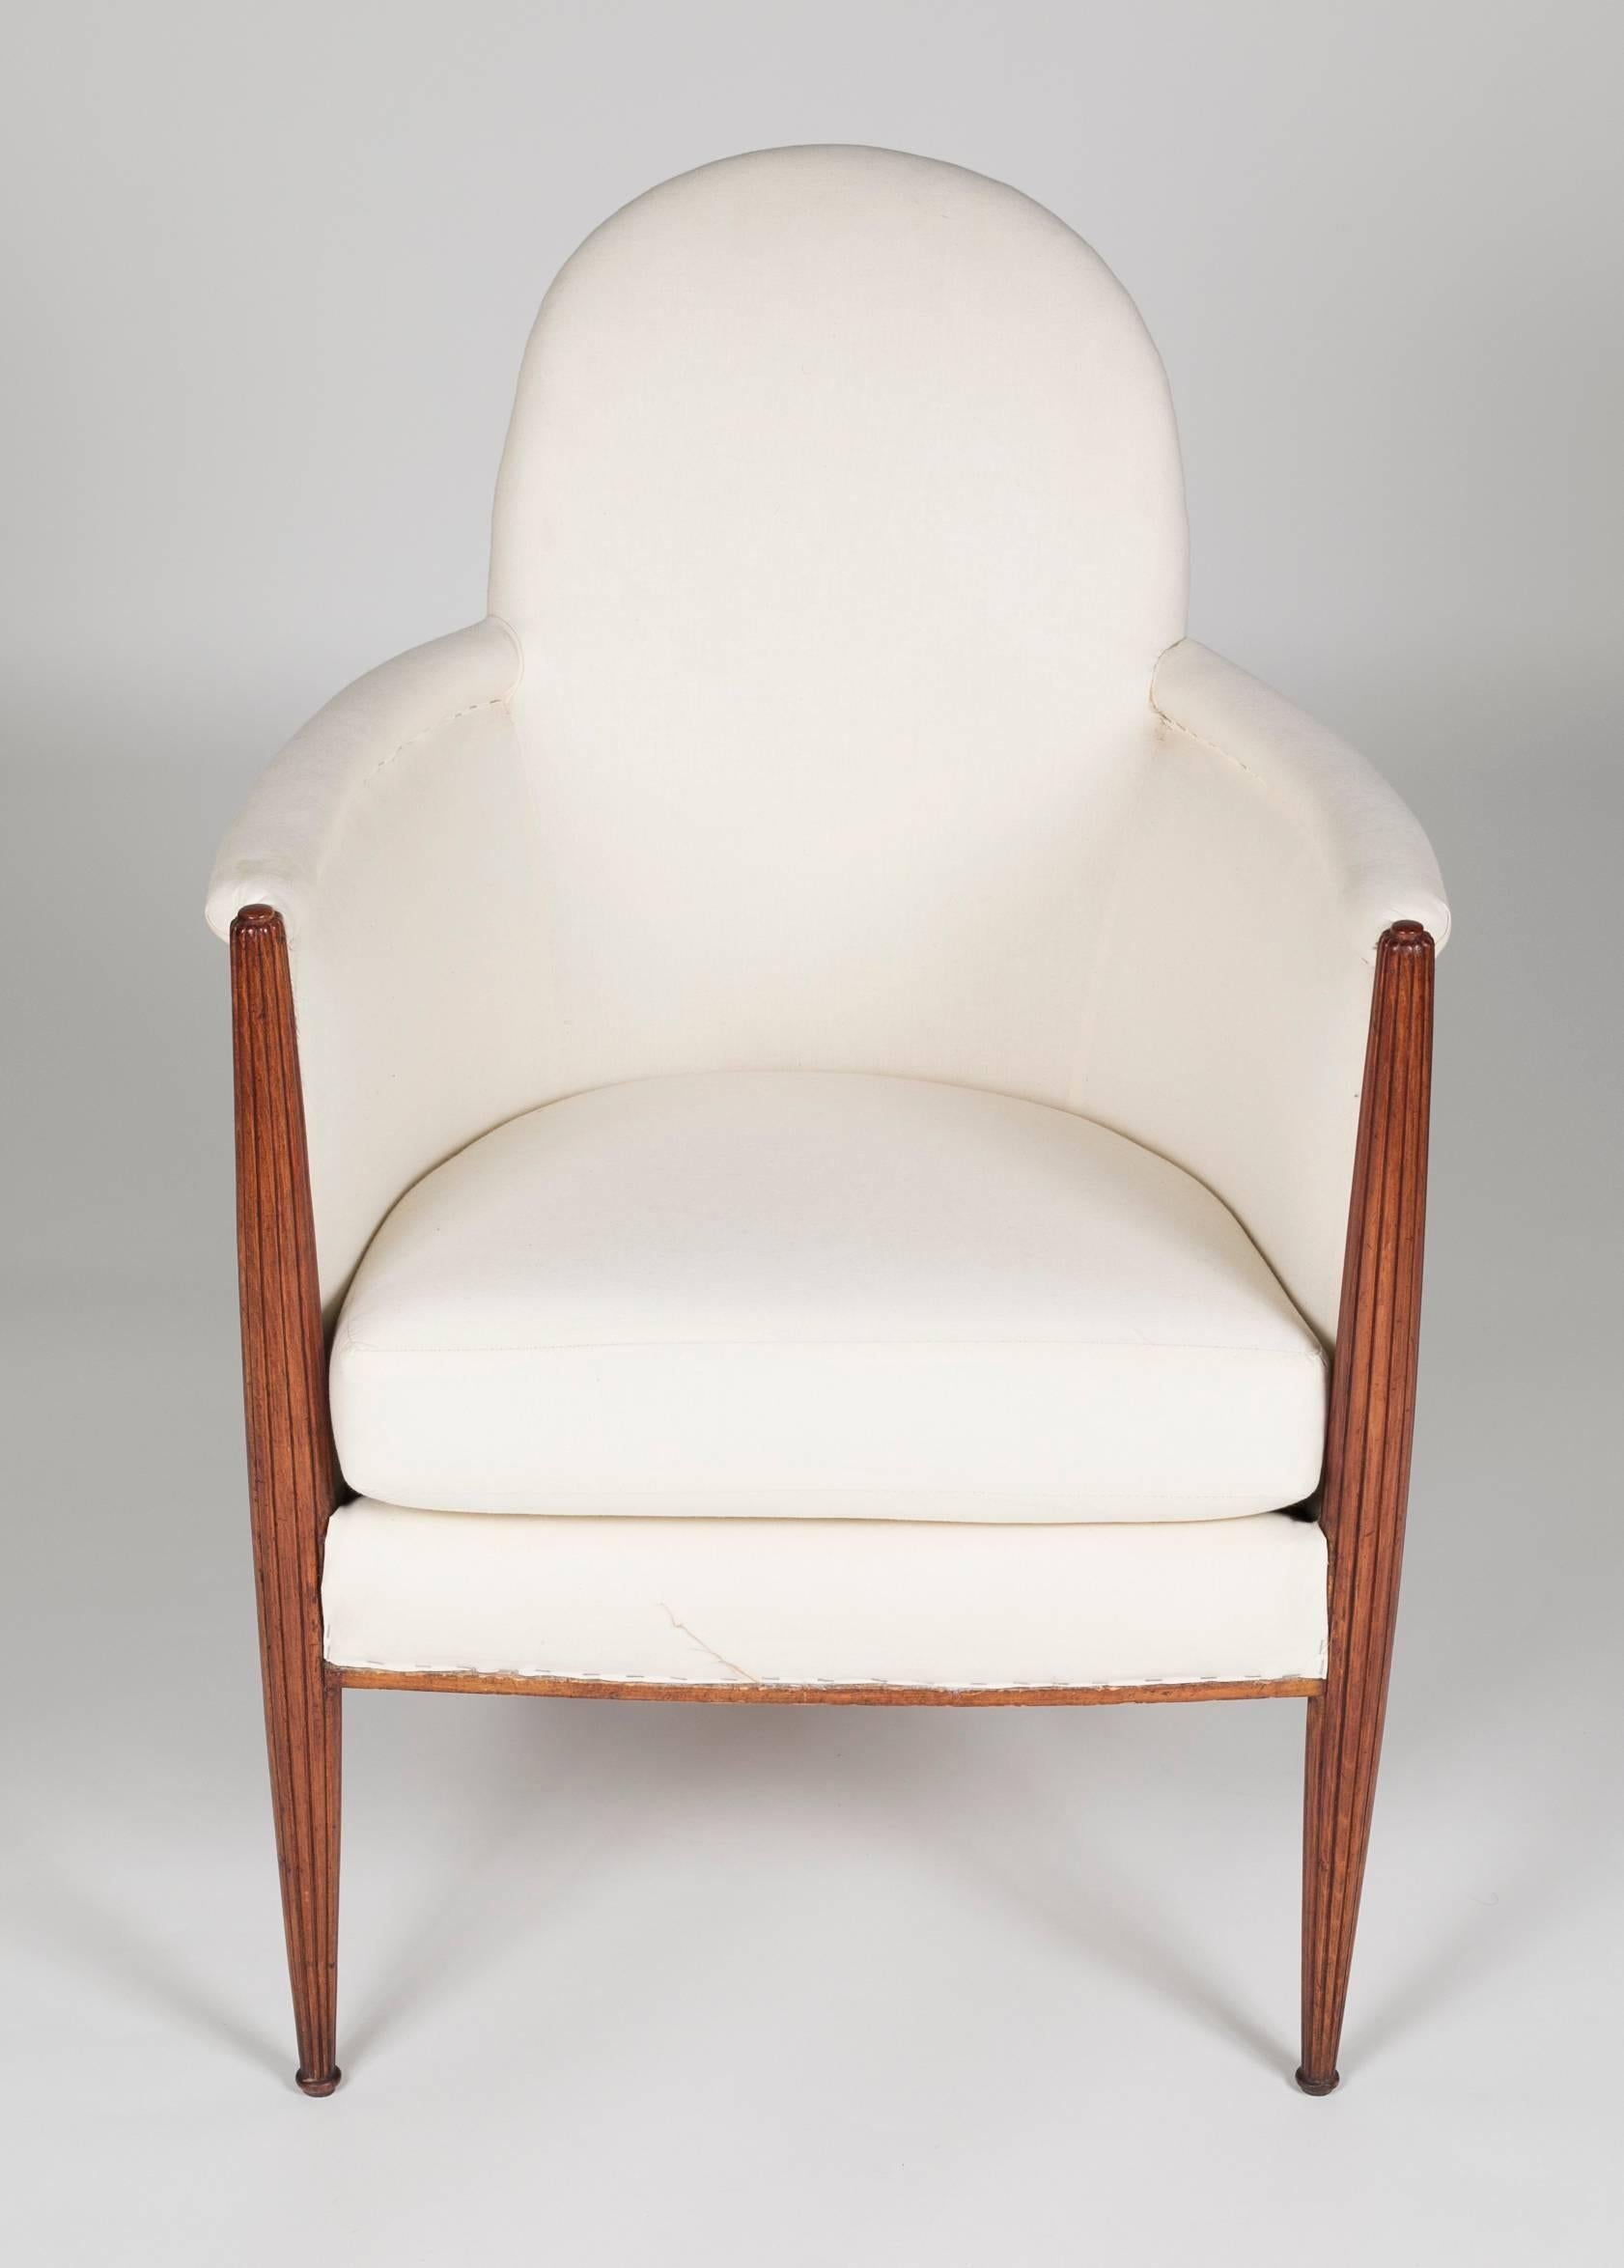 An Art Deco reeded armchair constructed in fruitwood with muslin fabric ready to match your interior.